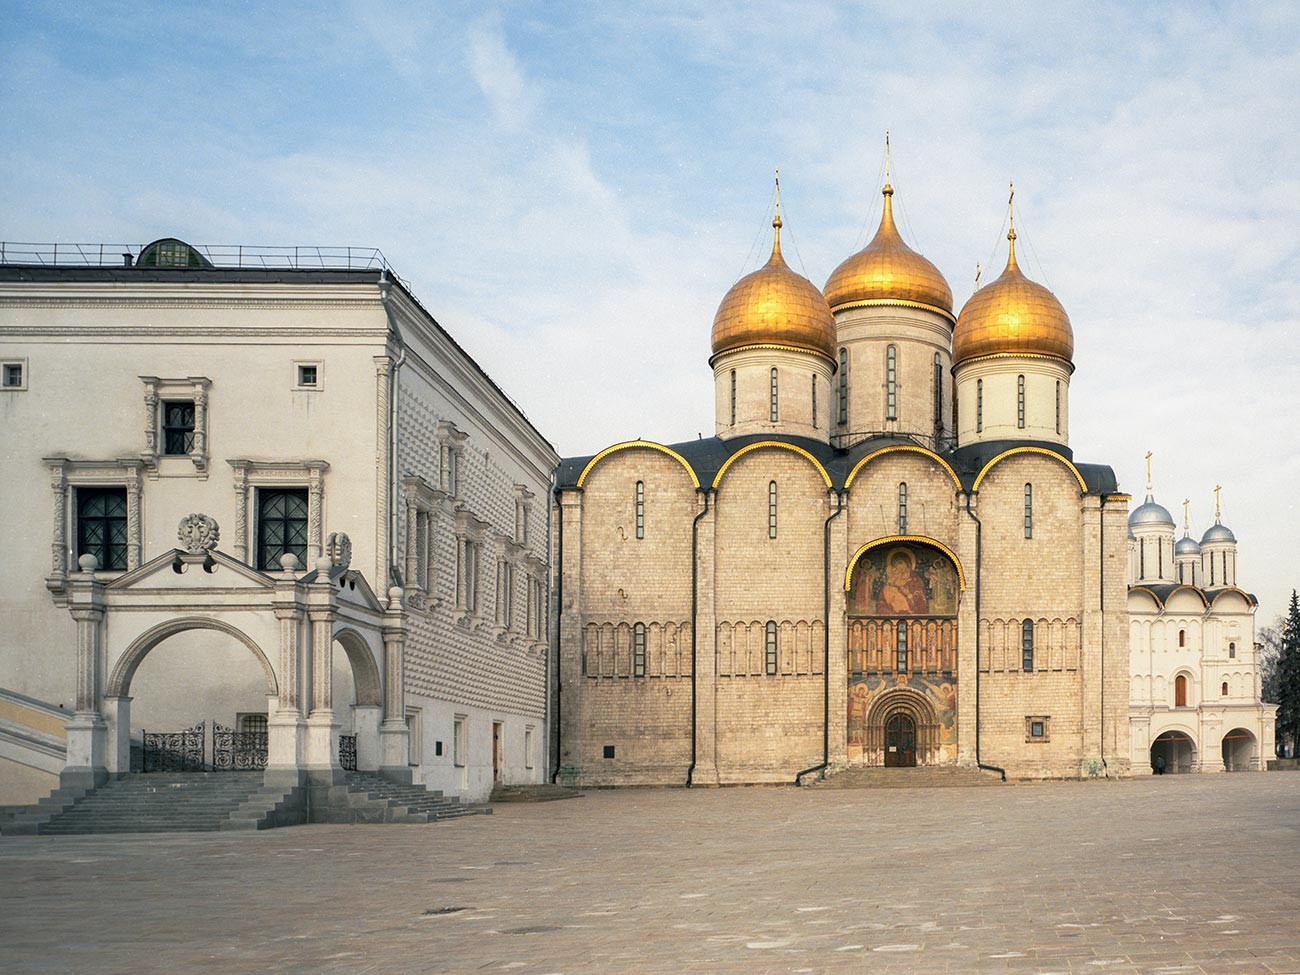 The Palace of Facets (L) and the Dormition Cathedral (R)